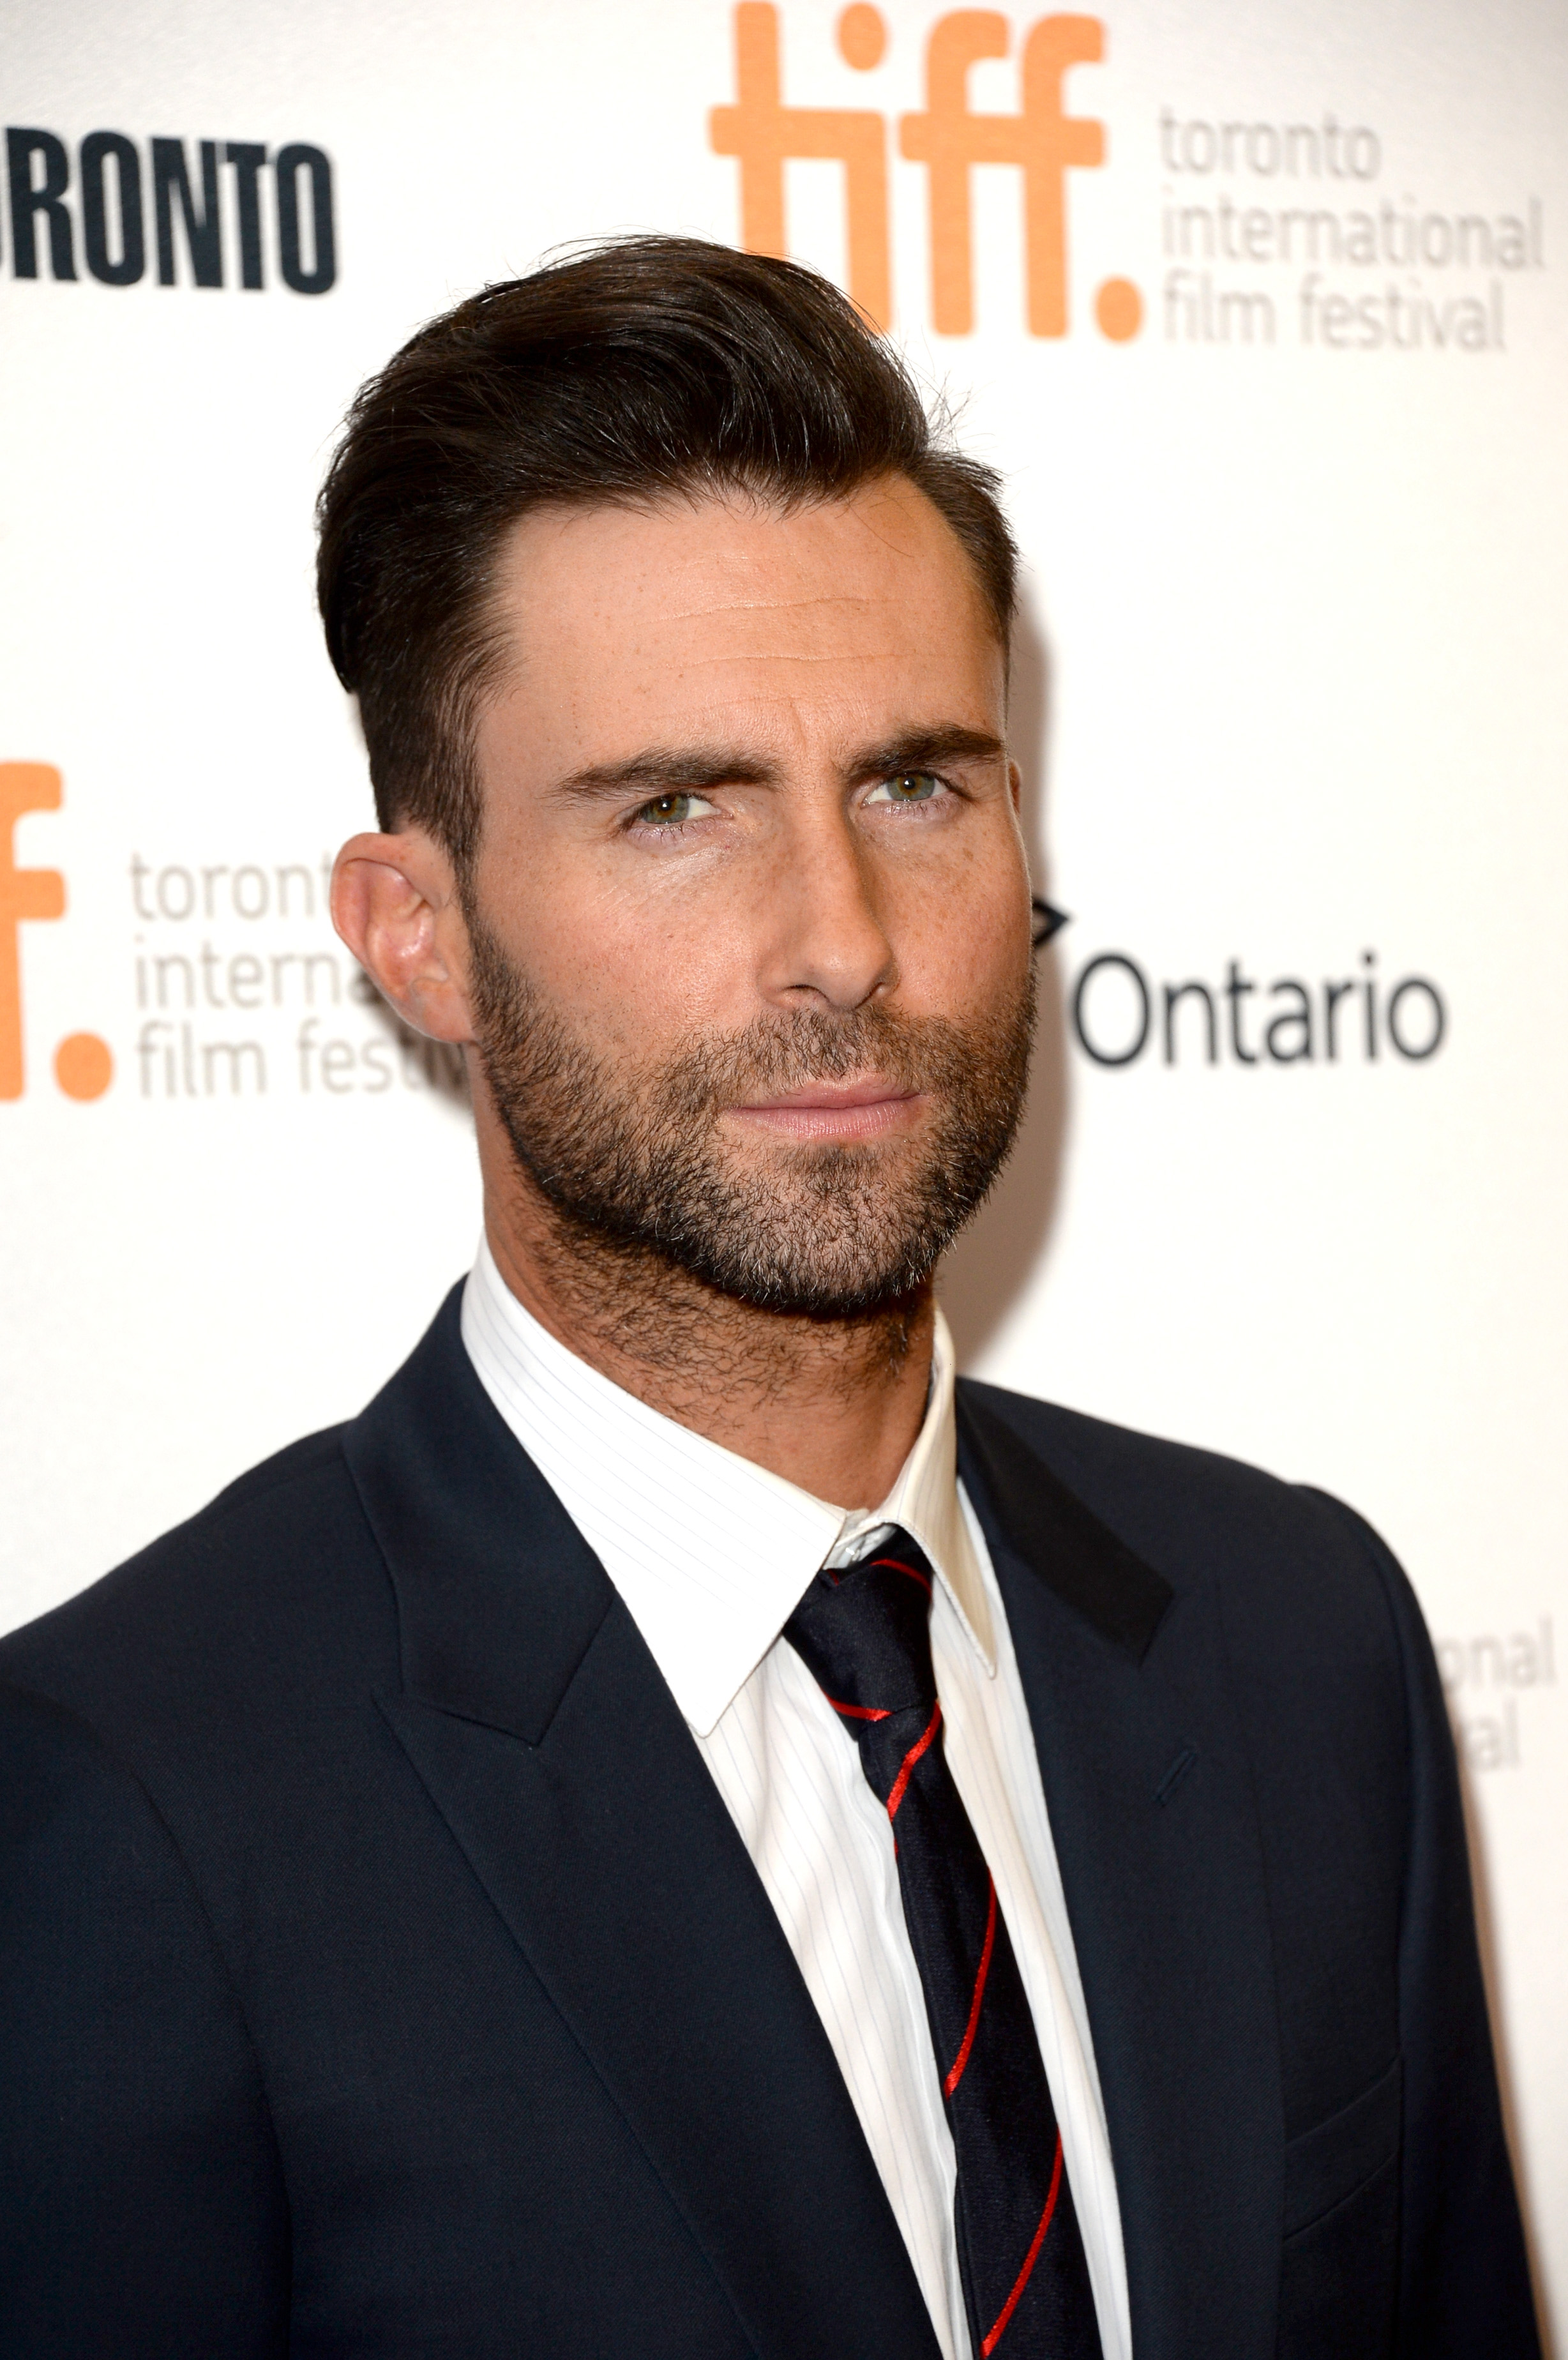 Adam Levine Reveals the Biggest Perk of Being Famous - Good Morning America